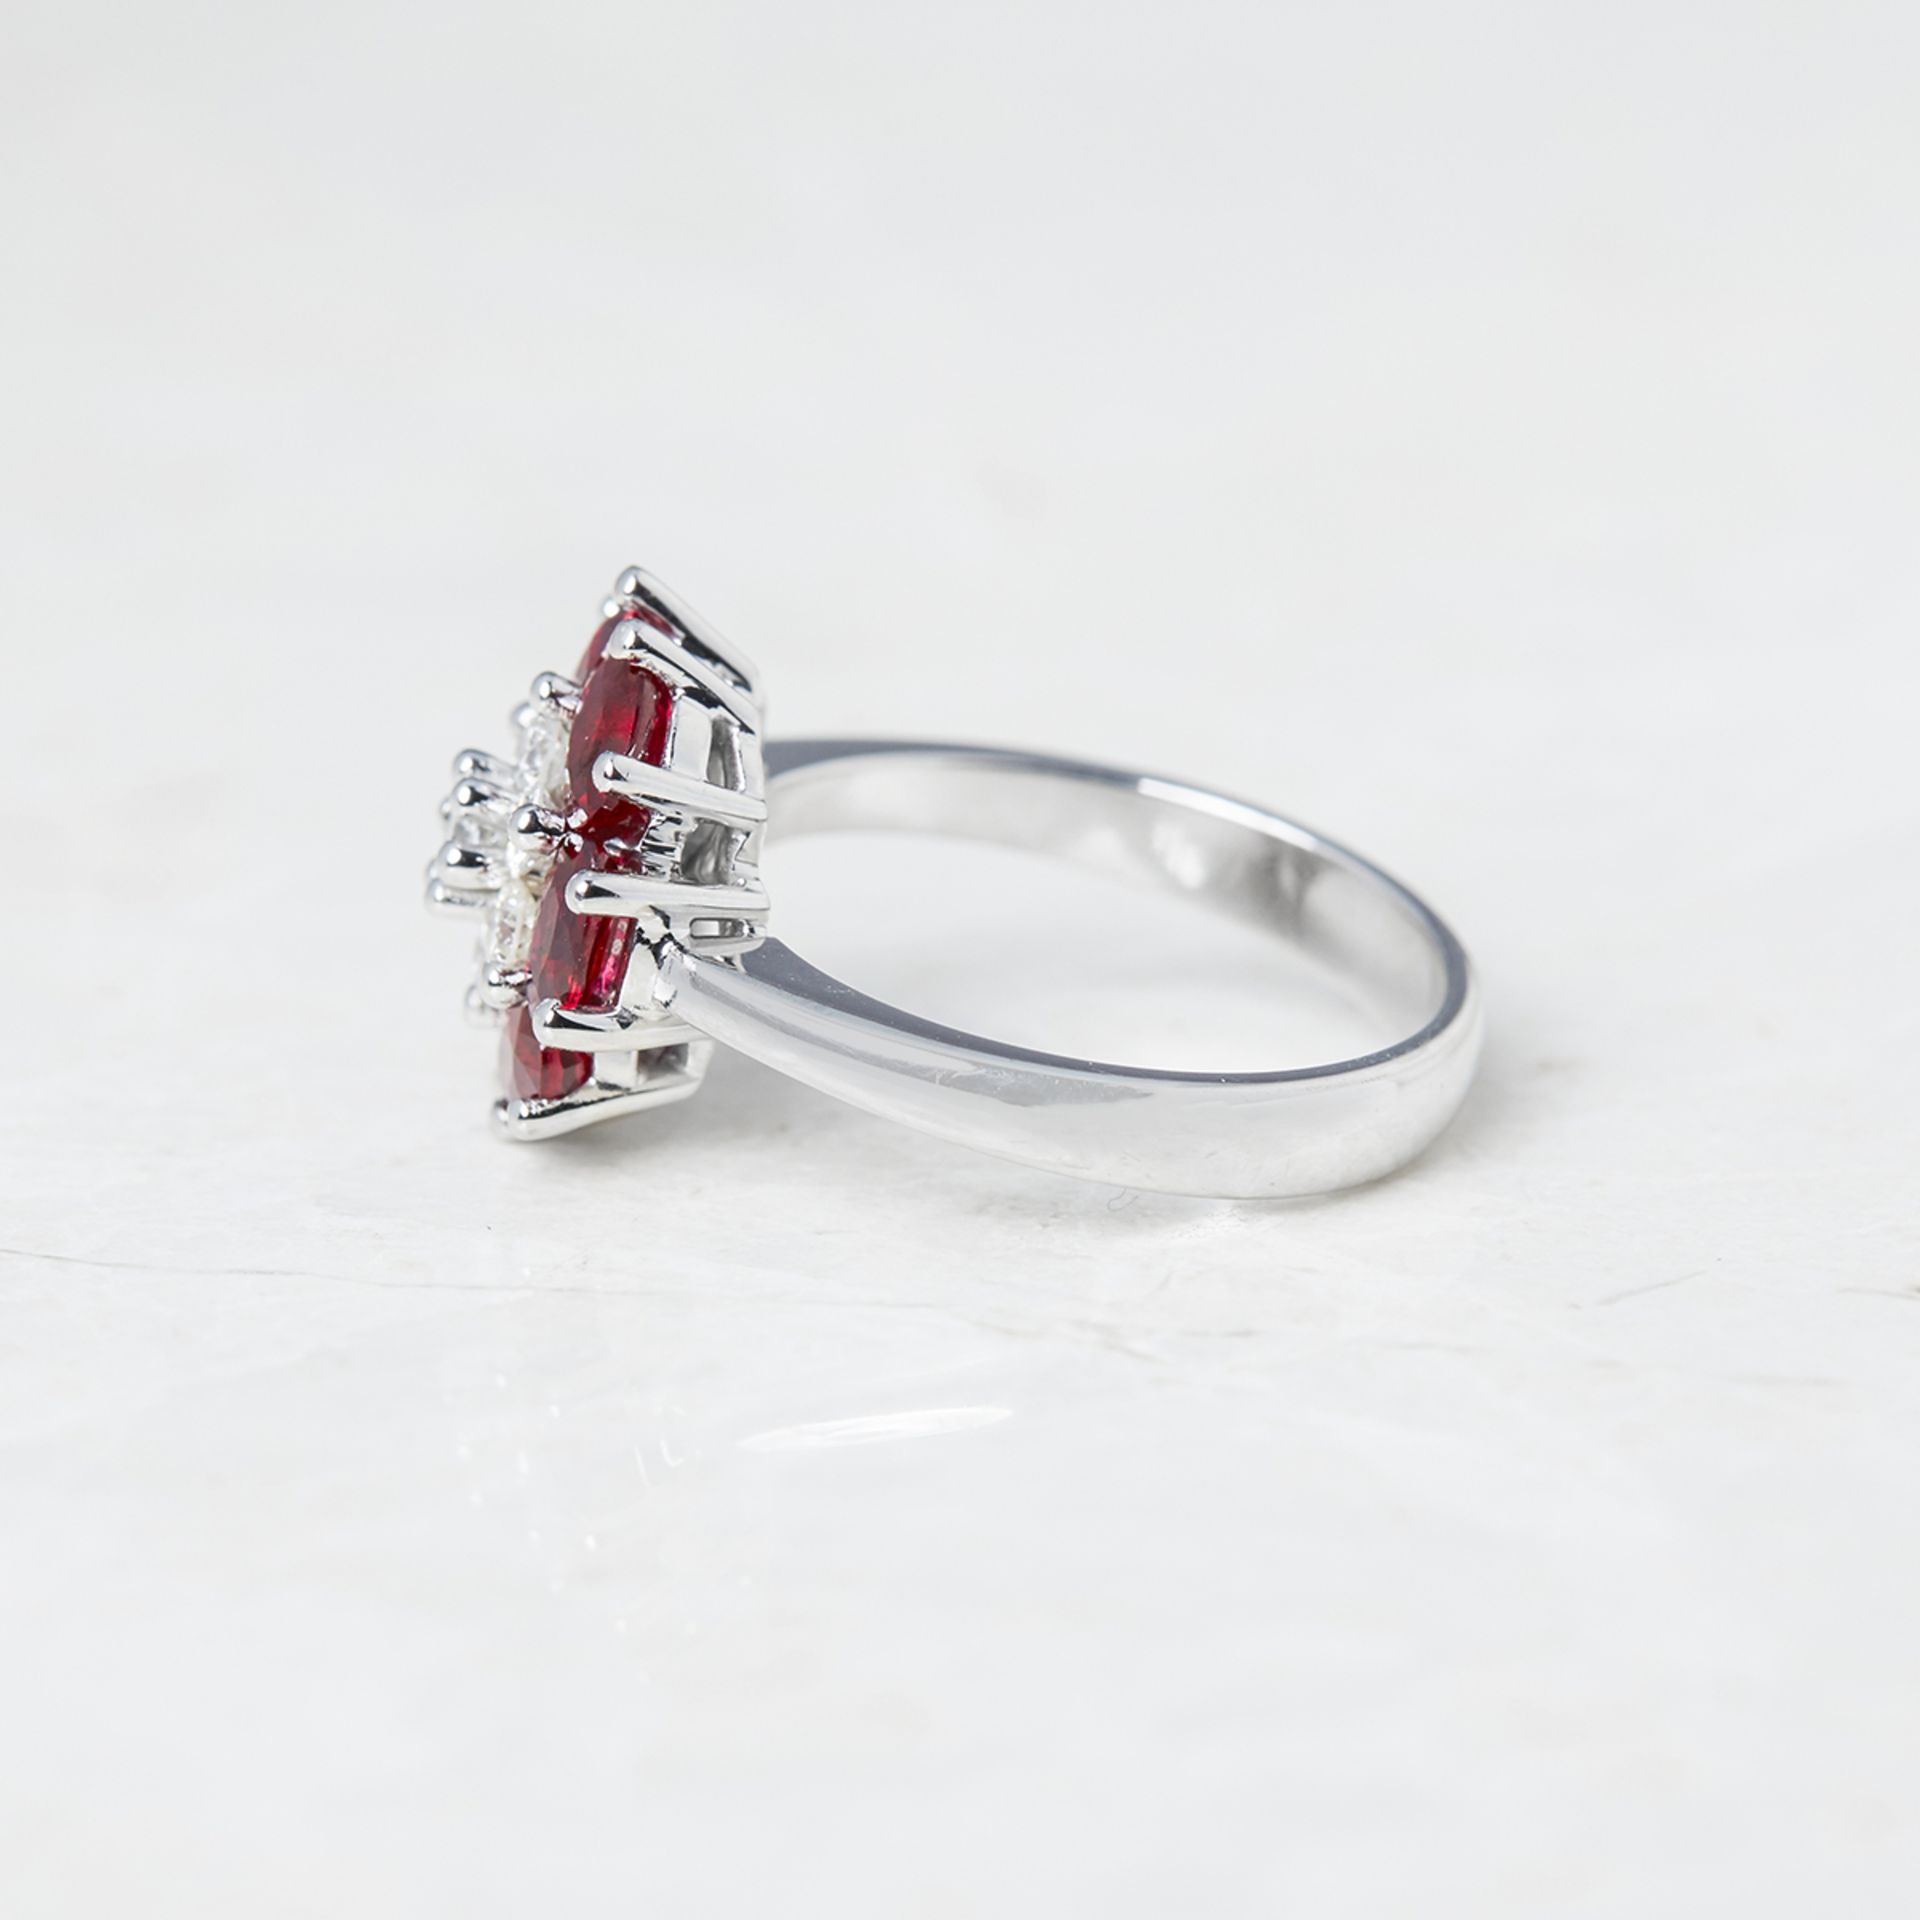 Camdame 18k White Gold 0.60ct Ruby & 0.25ct Diamond Floral Design Ring - Image 4 of 6